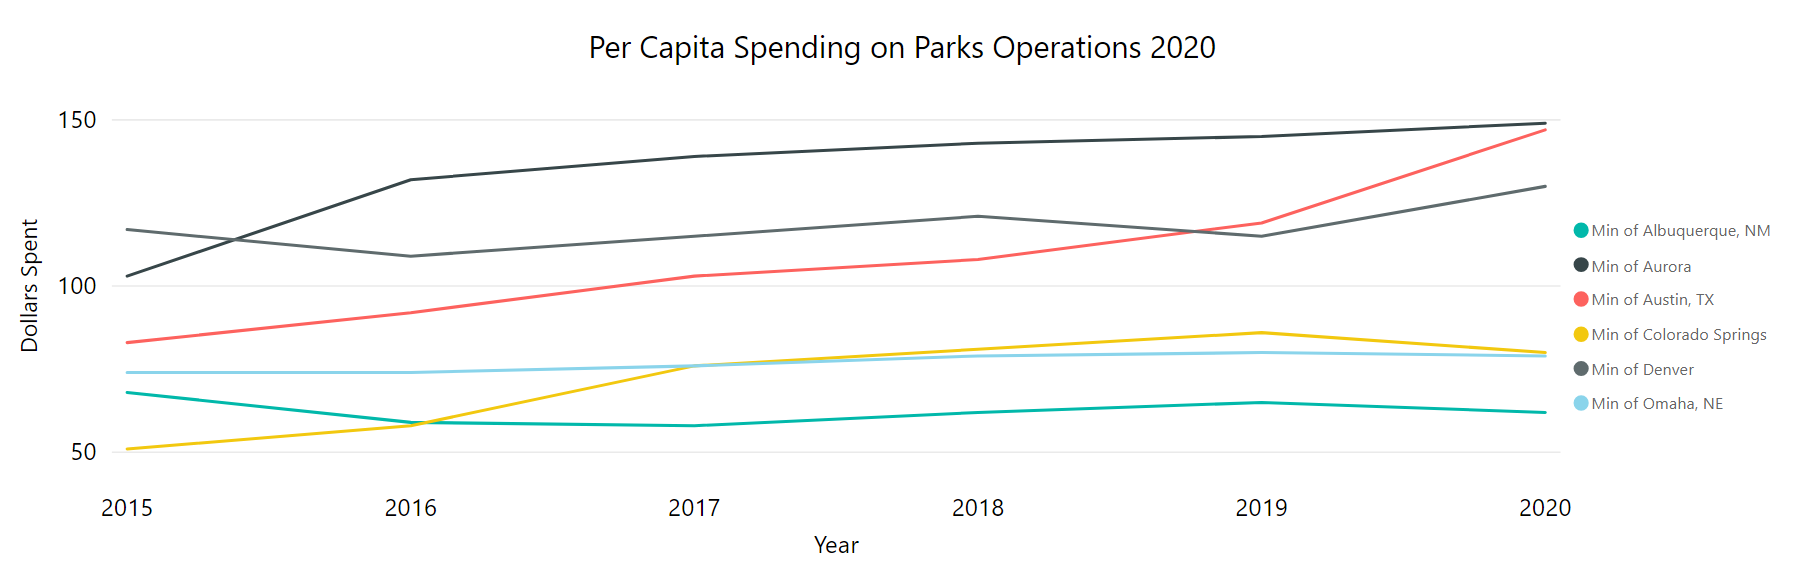 chart showing per capita spending on parks by year from 2012 to 2020. Coloado Springs spending increased from 2015 to 2019 but dipped slightly in 2020. Colorado Springs spends significantly less then Aurora Colorado, Austin Texas and Denver. 